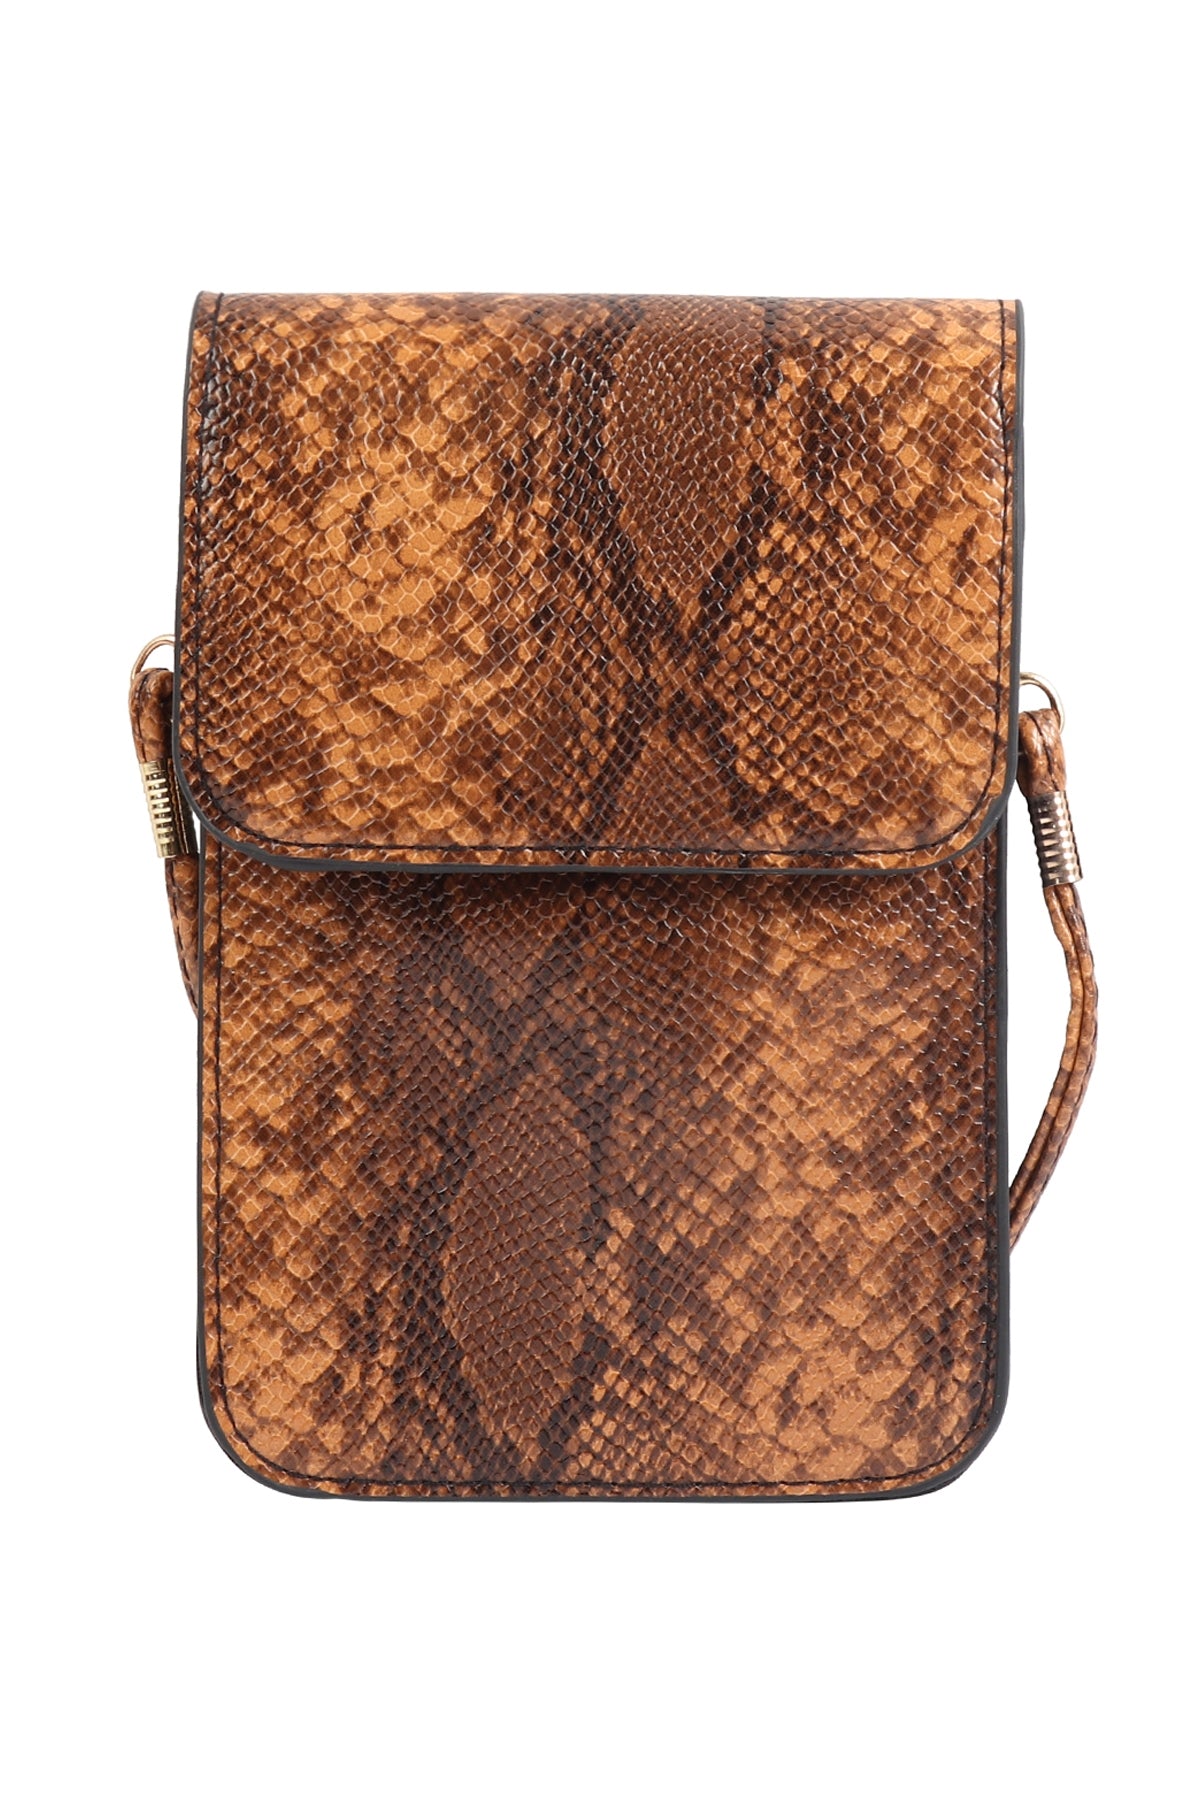 SNAKE CELLPHONE CROSSBODY WITH CLEAR WINDOW BAG